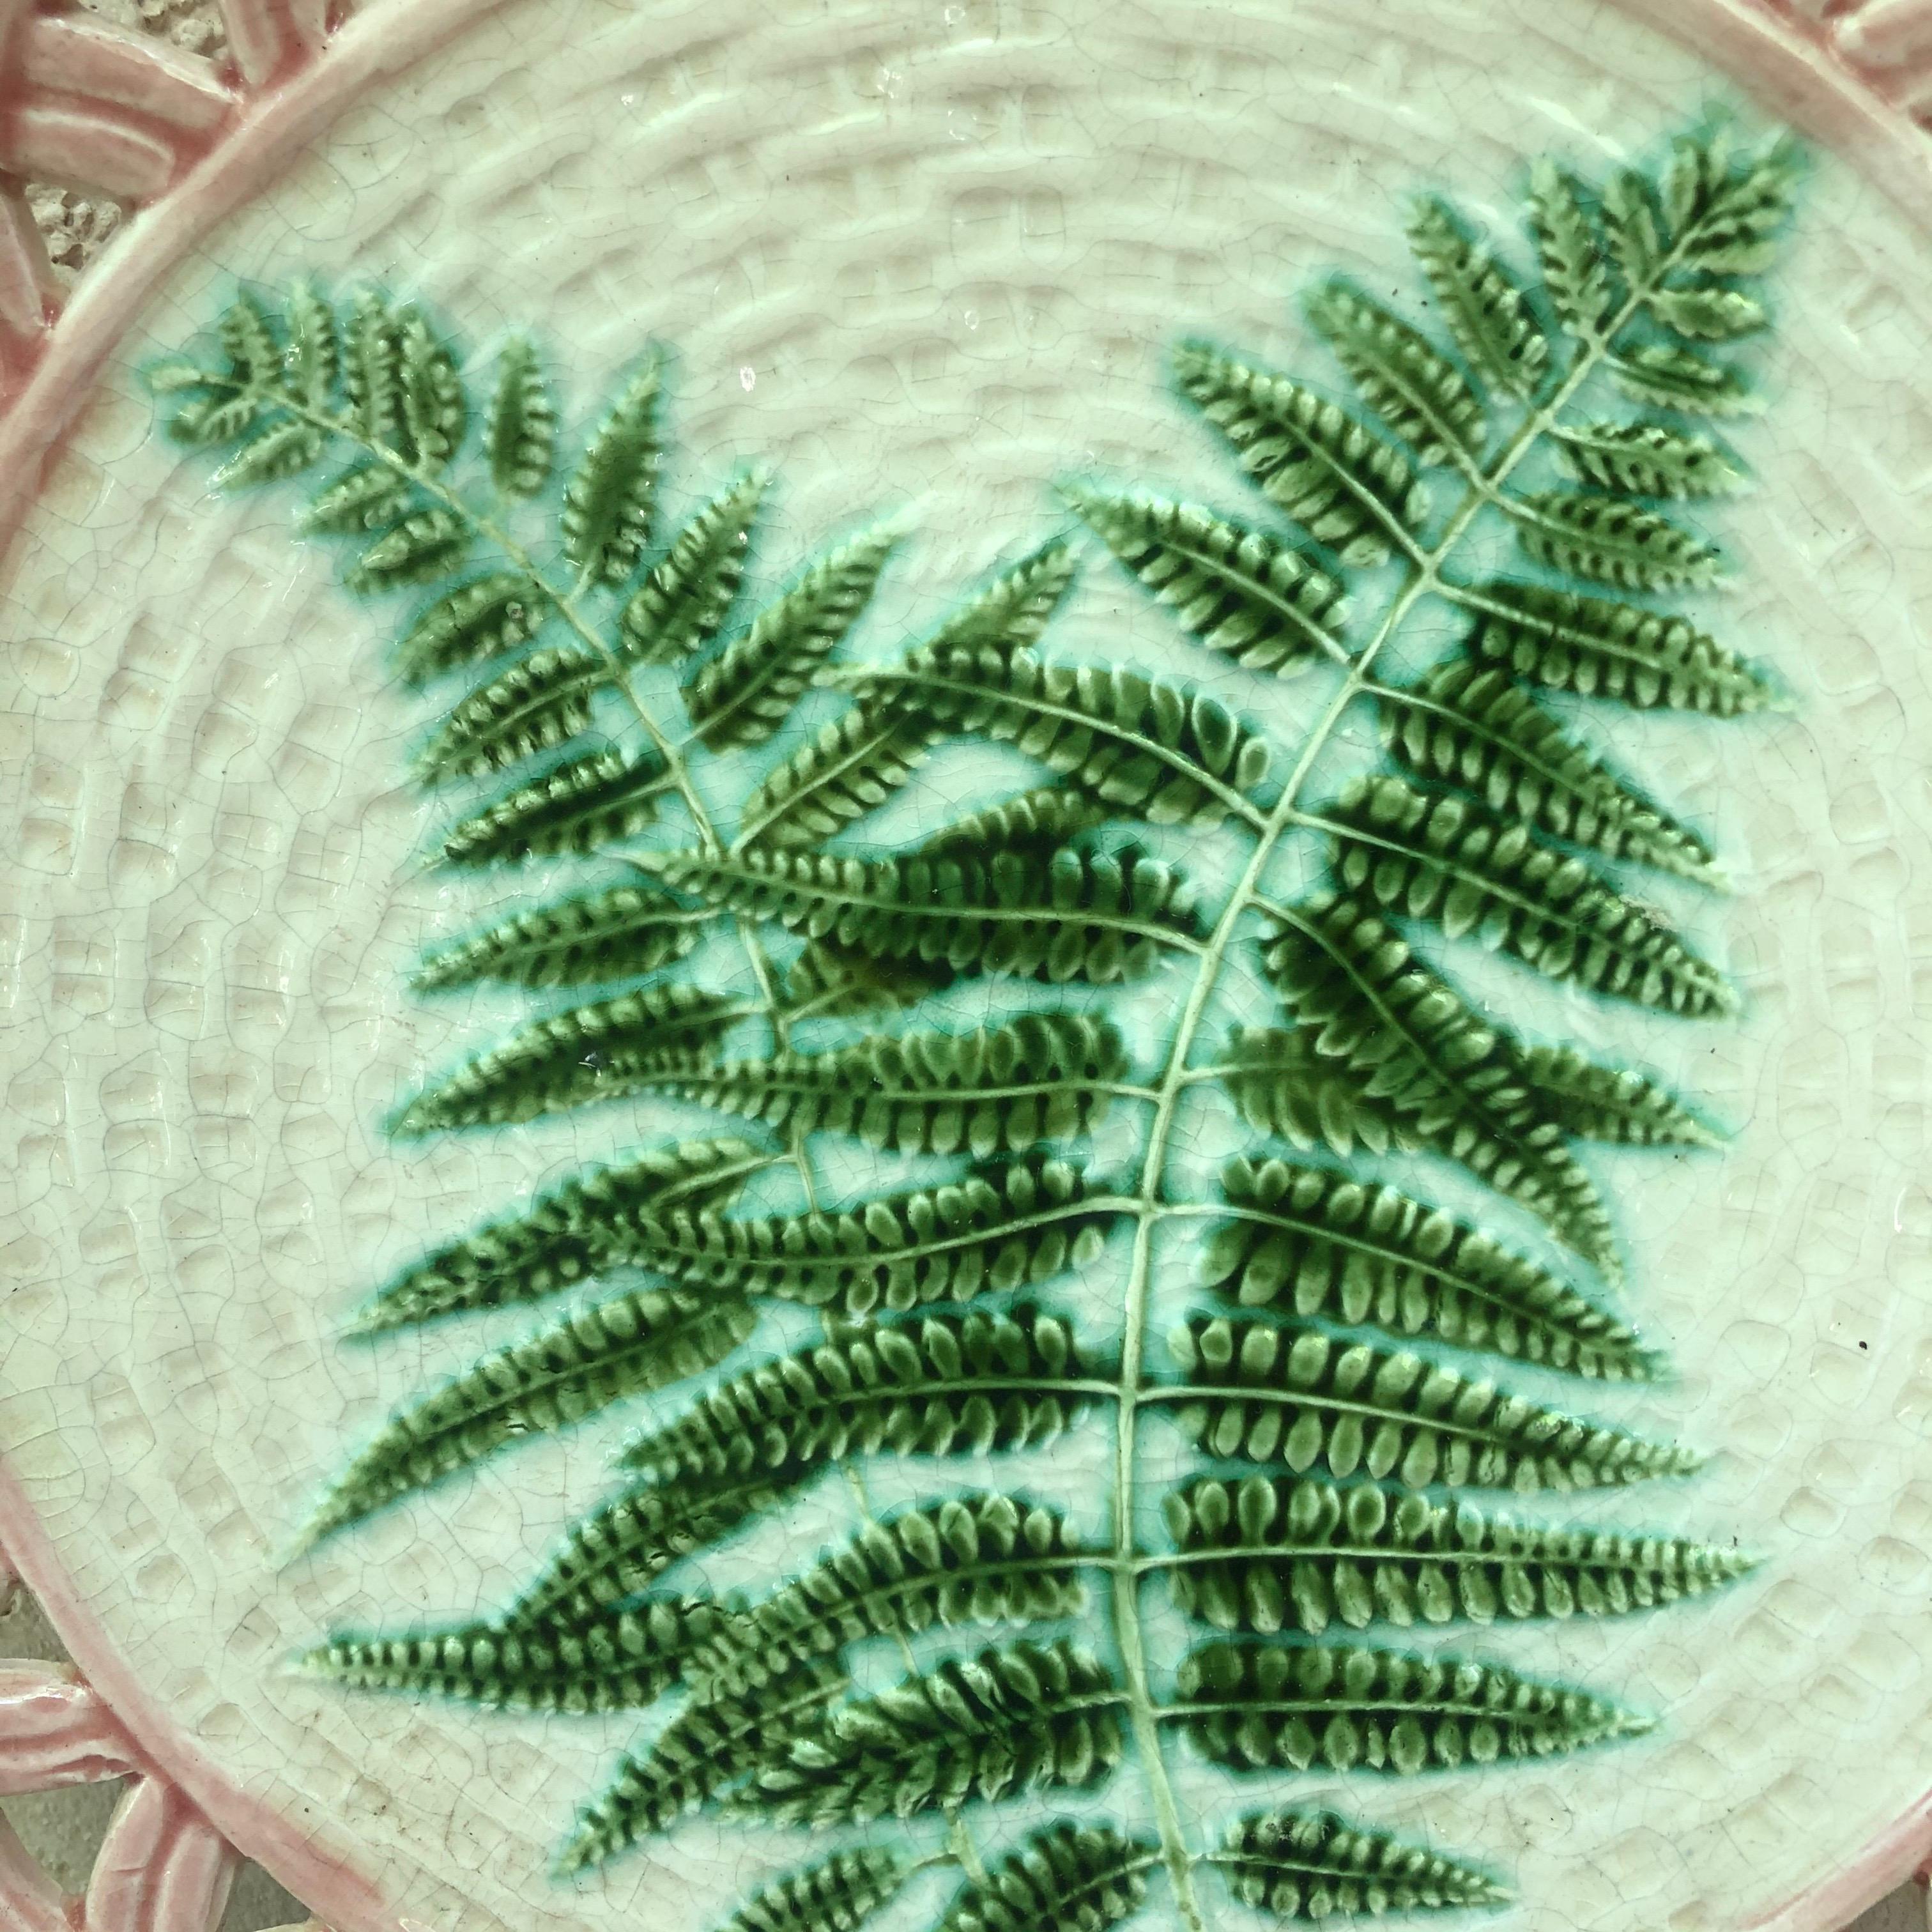 French 19th century Majolica reticulated plate signed Sarreguemines.
Decorated with larges ferns on a beige basket weave background, delicate pink reticulated border.